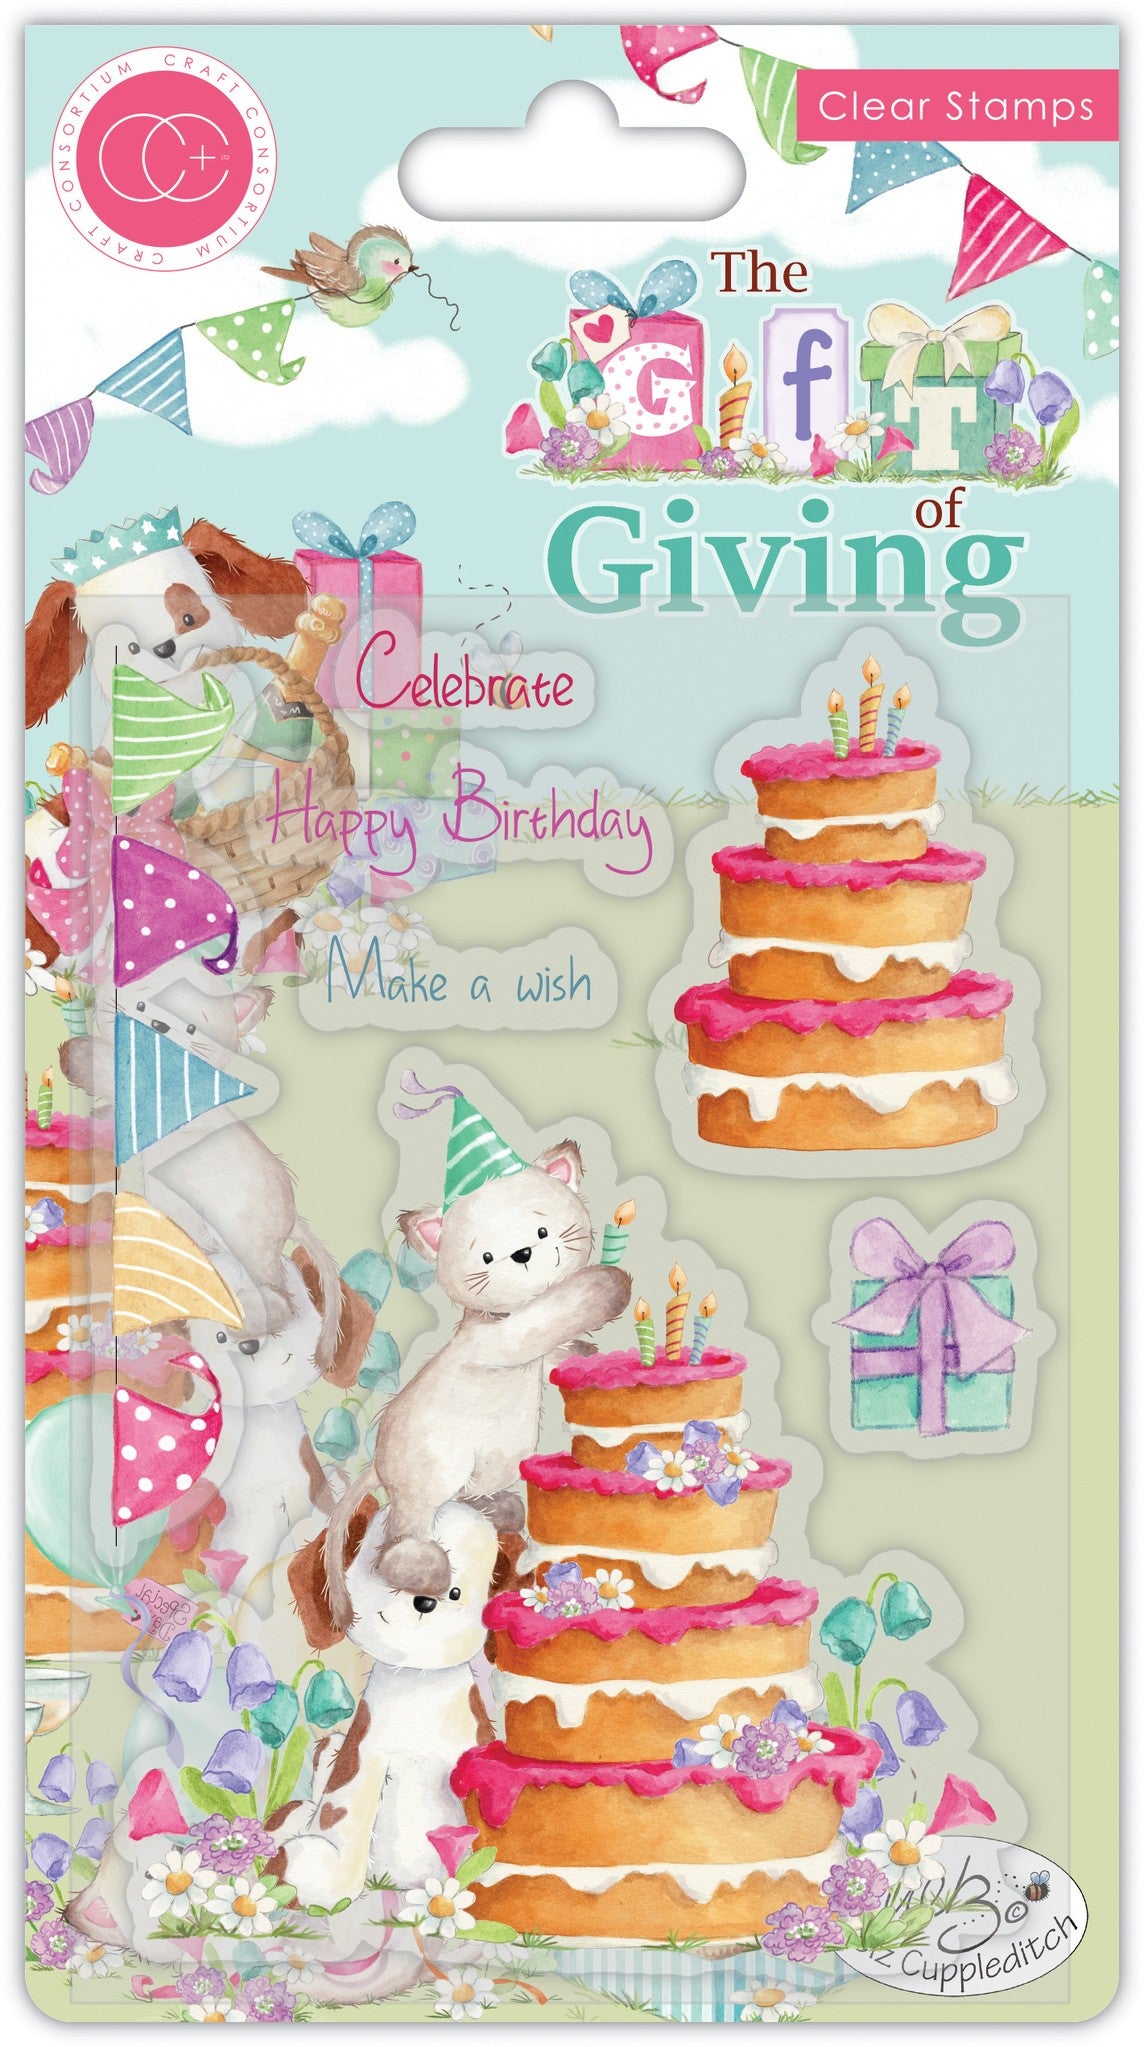 Craft Consortium The Gift of Giving Clear Stamps Make a Wish (CCSTMP039)